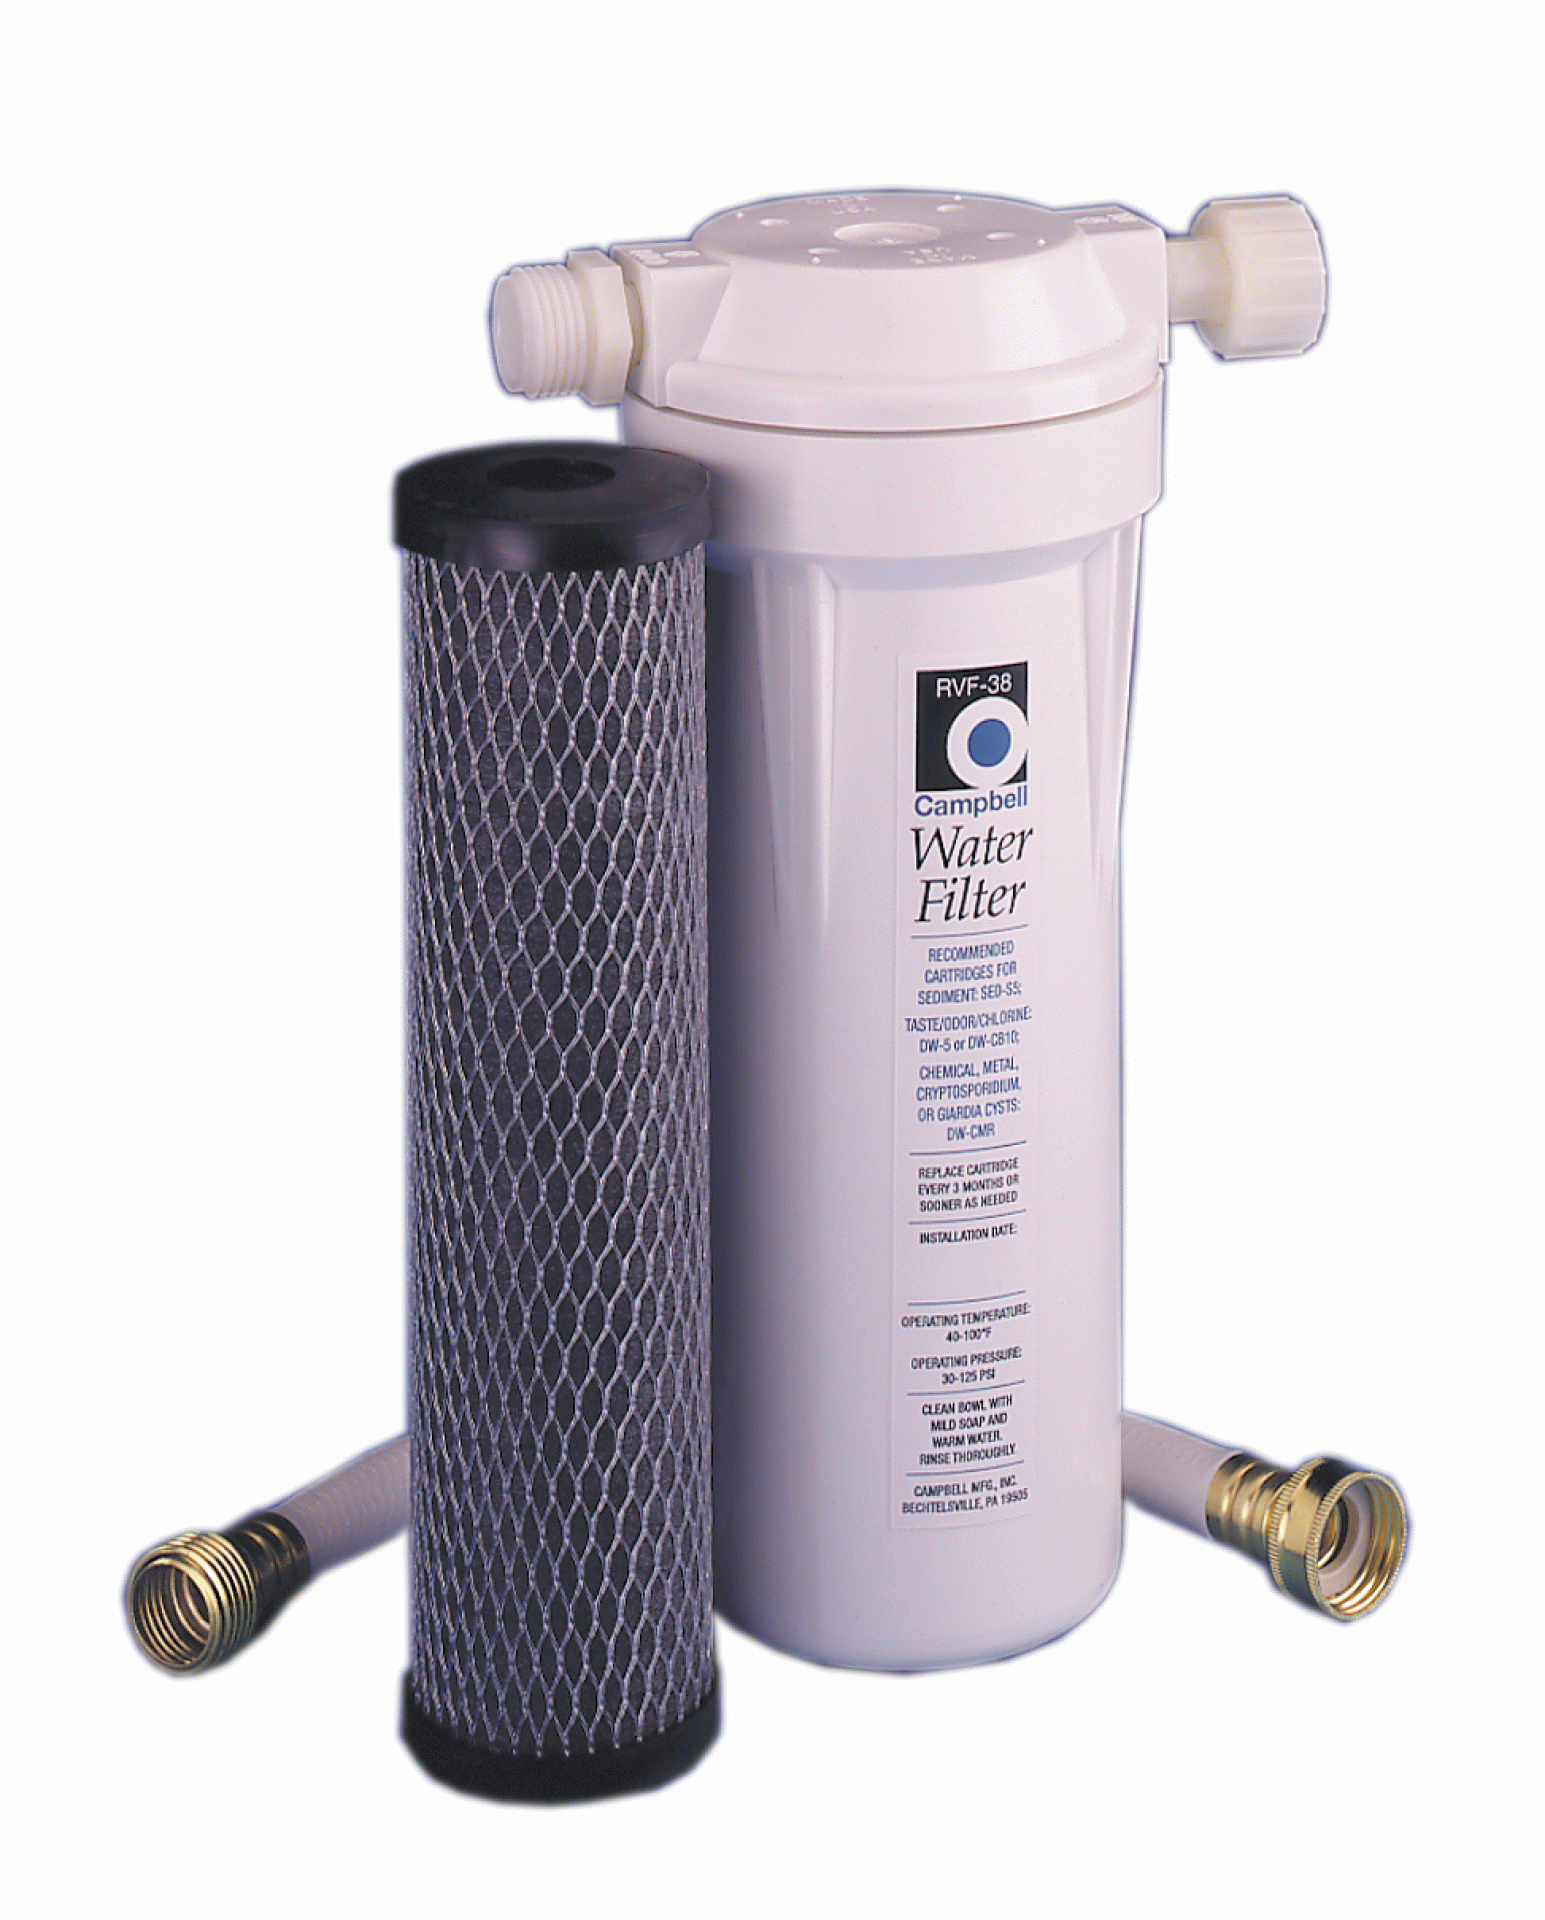 CAMPBELL MANUFACT.INC. | RVF-38 | WATER FILTER SYSTEM PRE-TANK